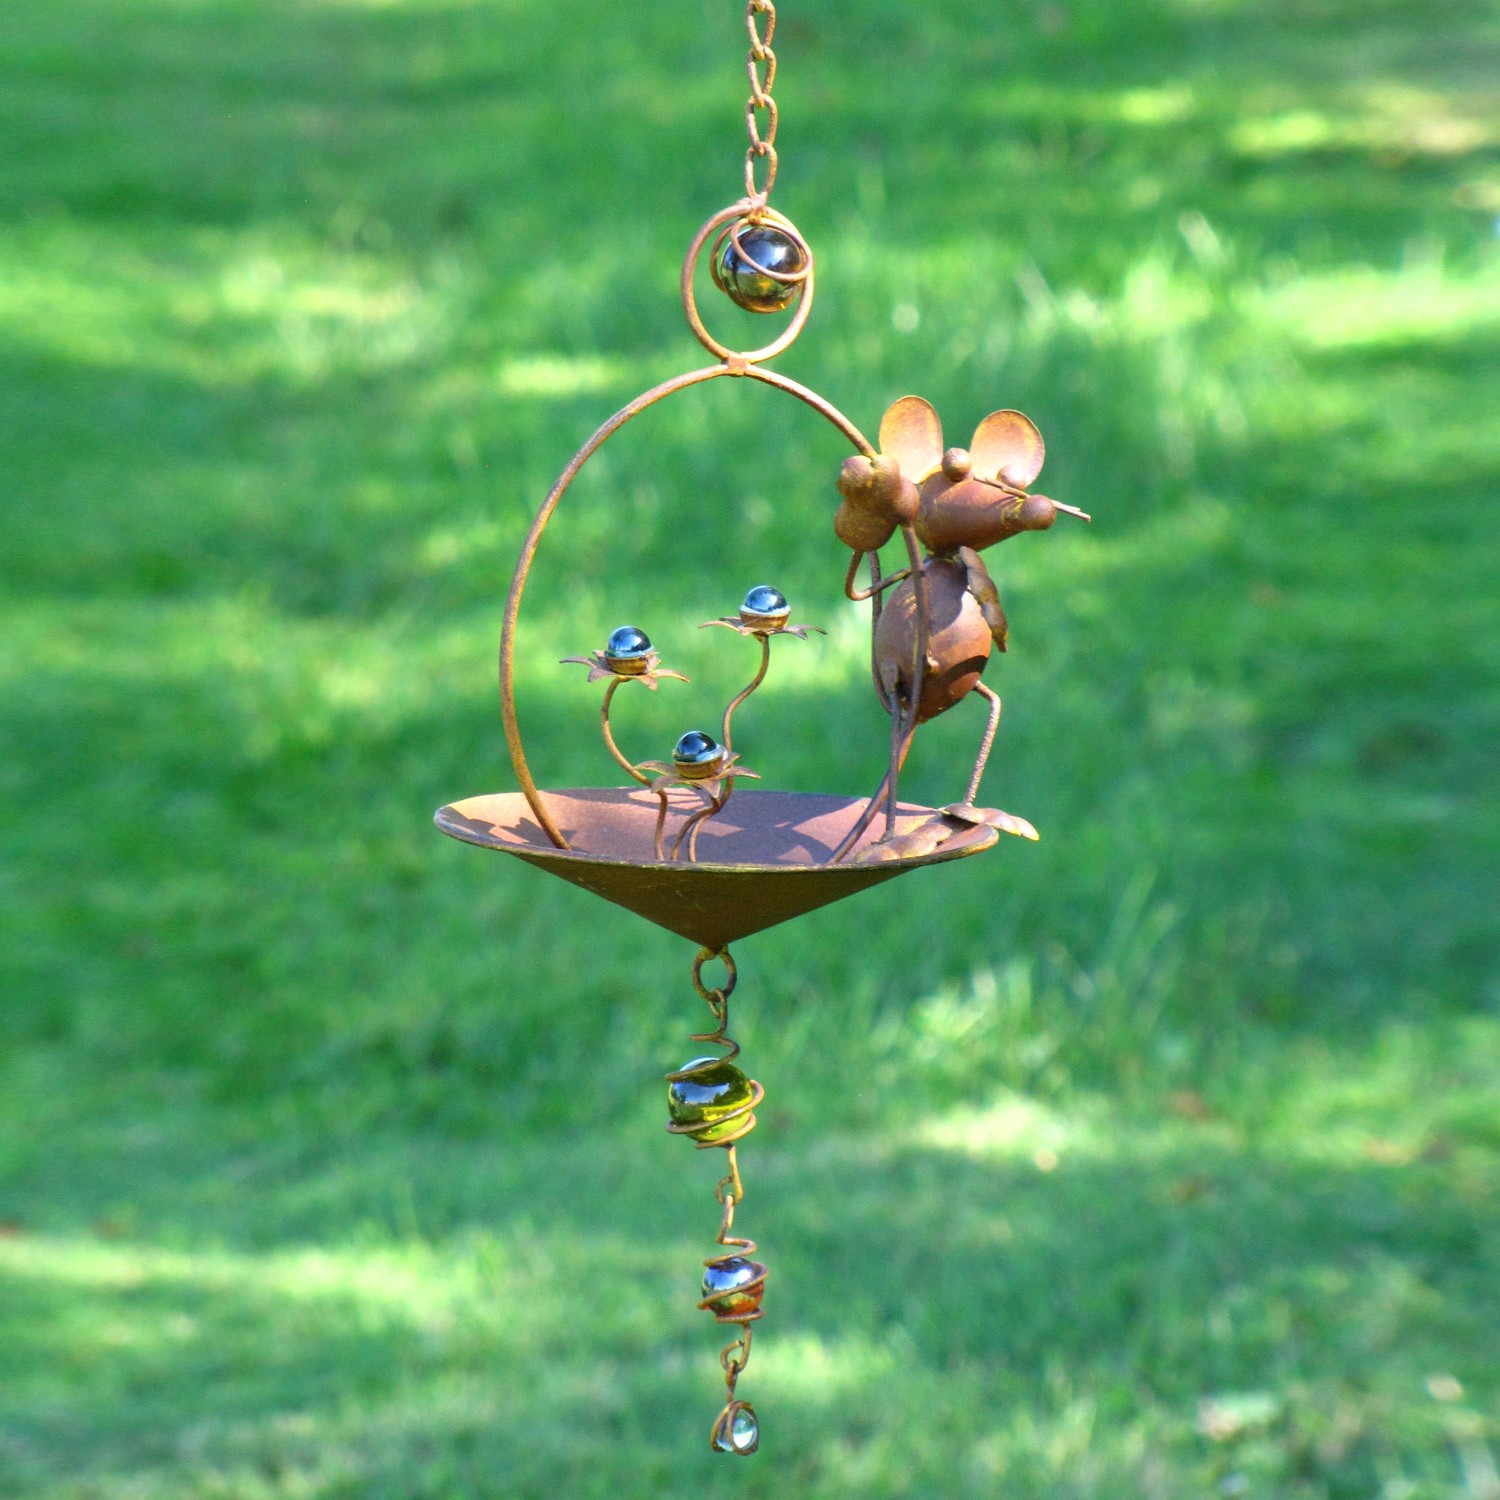 Special Chain Multiple Lengths for Hanging Bird Feeder Wind Chimes Bird  Bath 